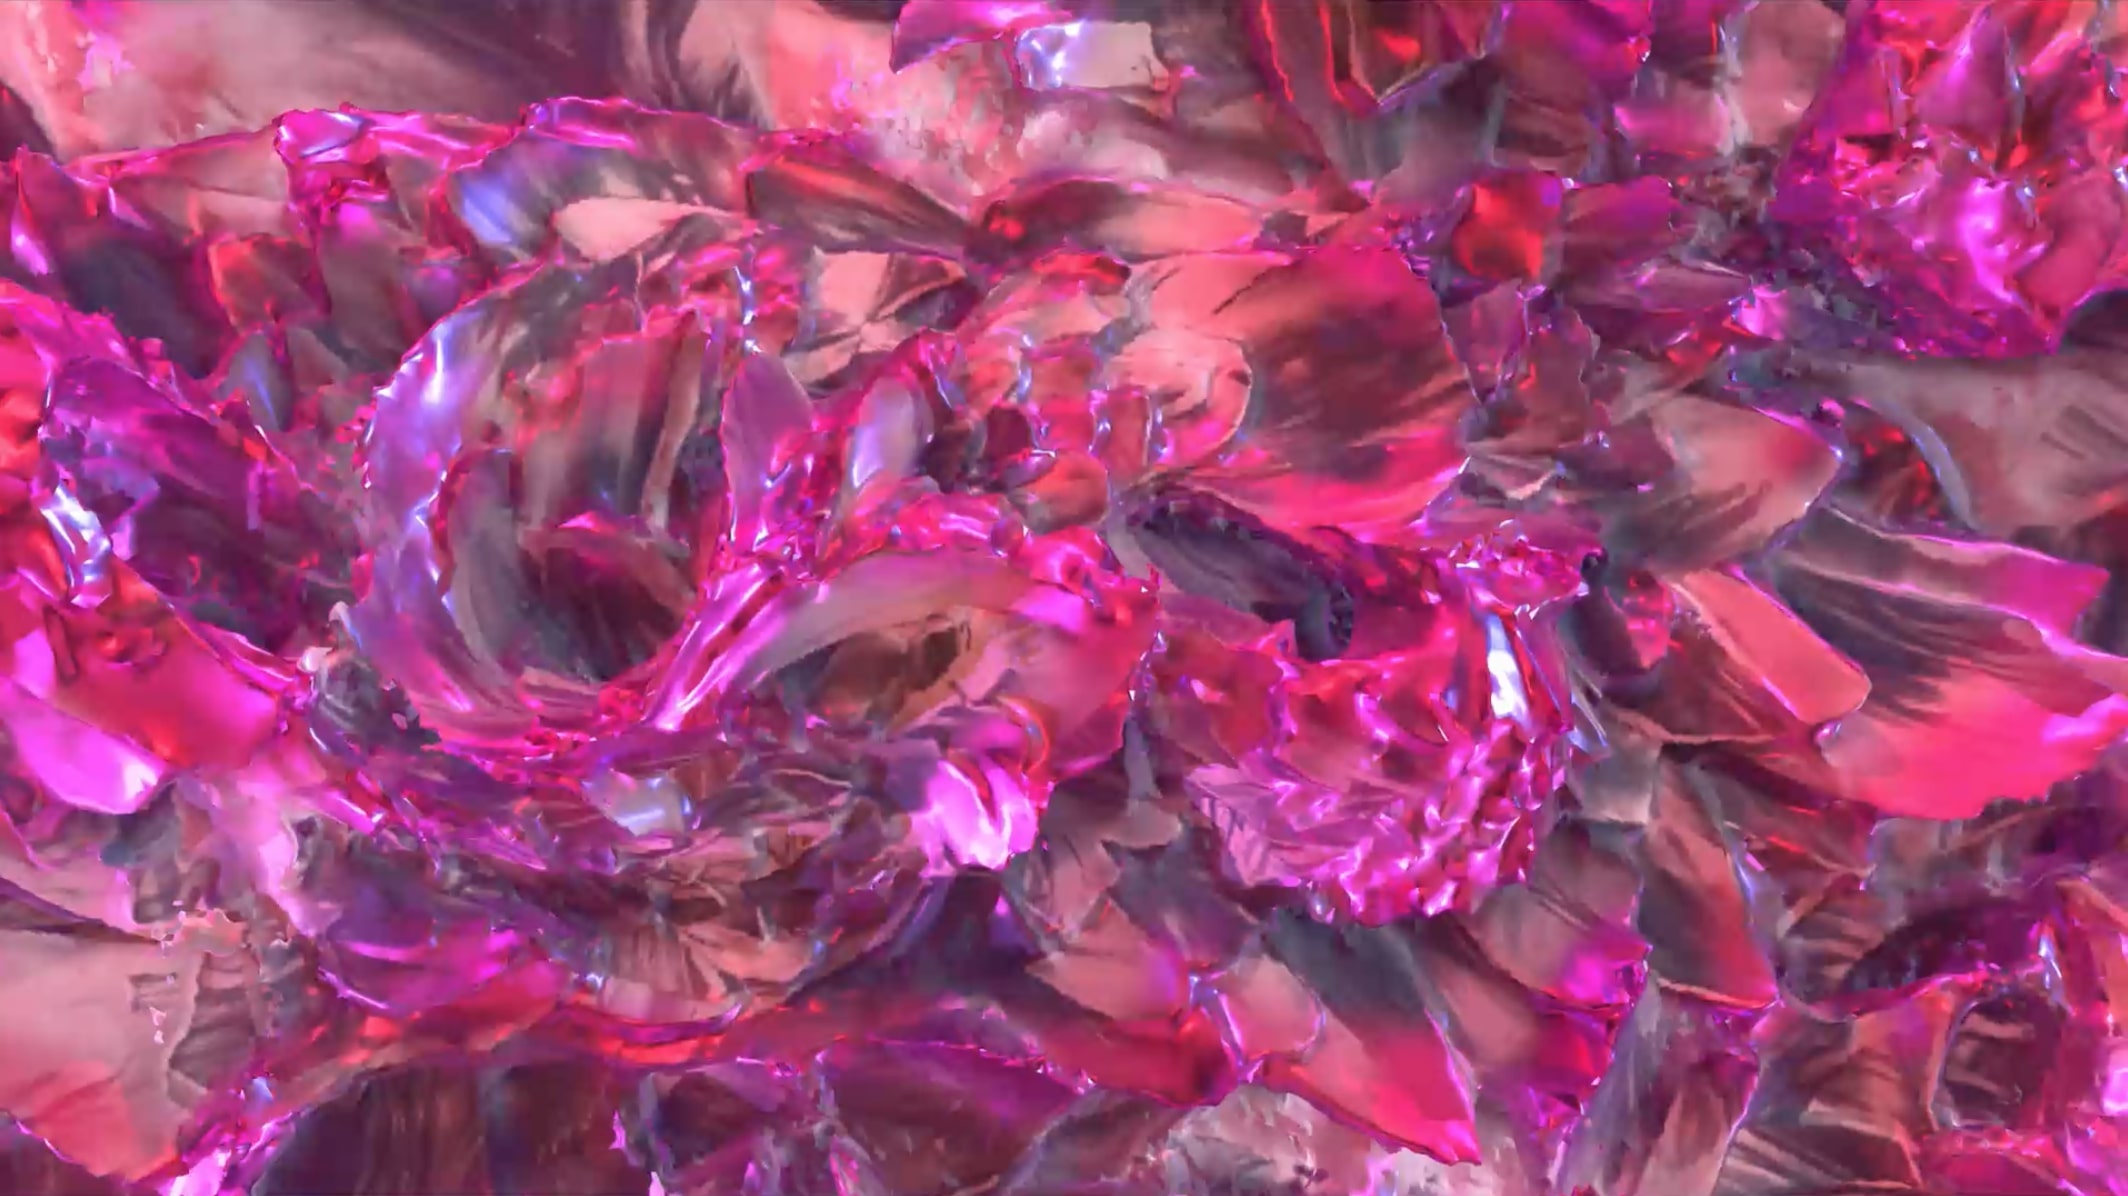 An abstract image showing a swirl of pink glittery shapes